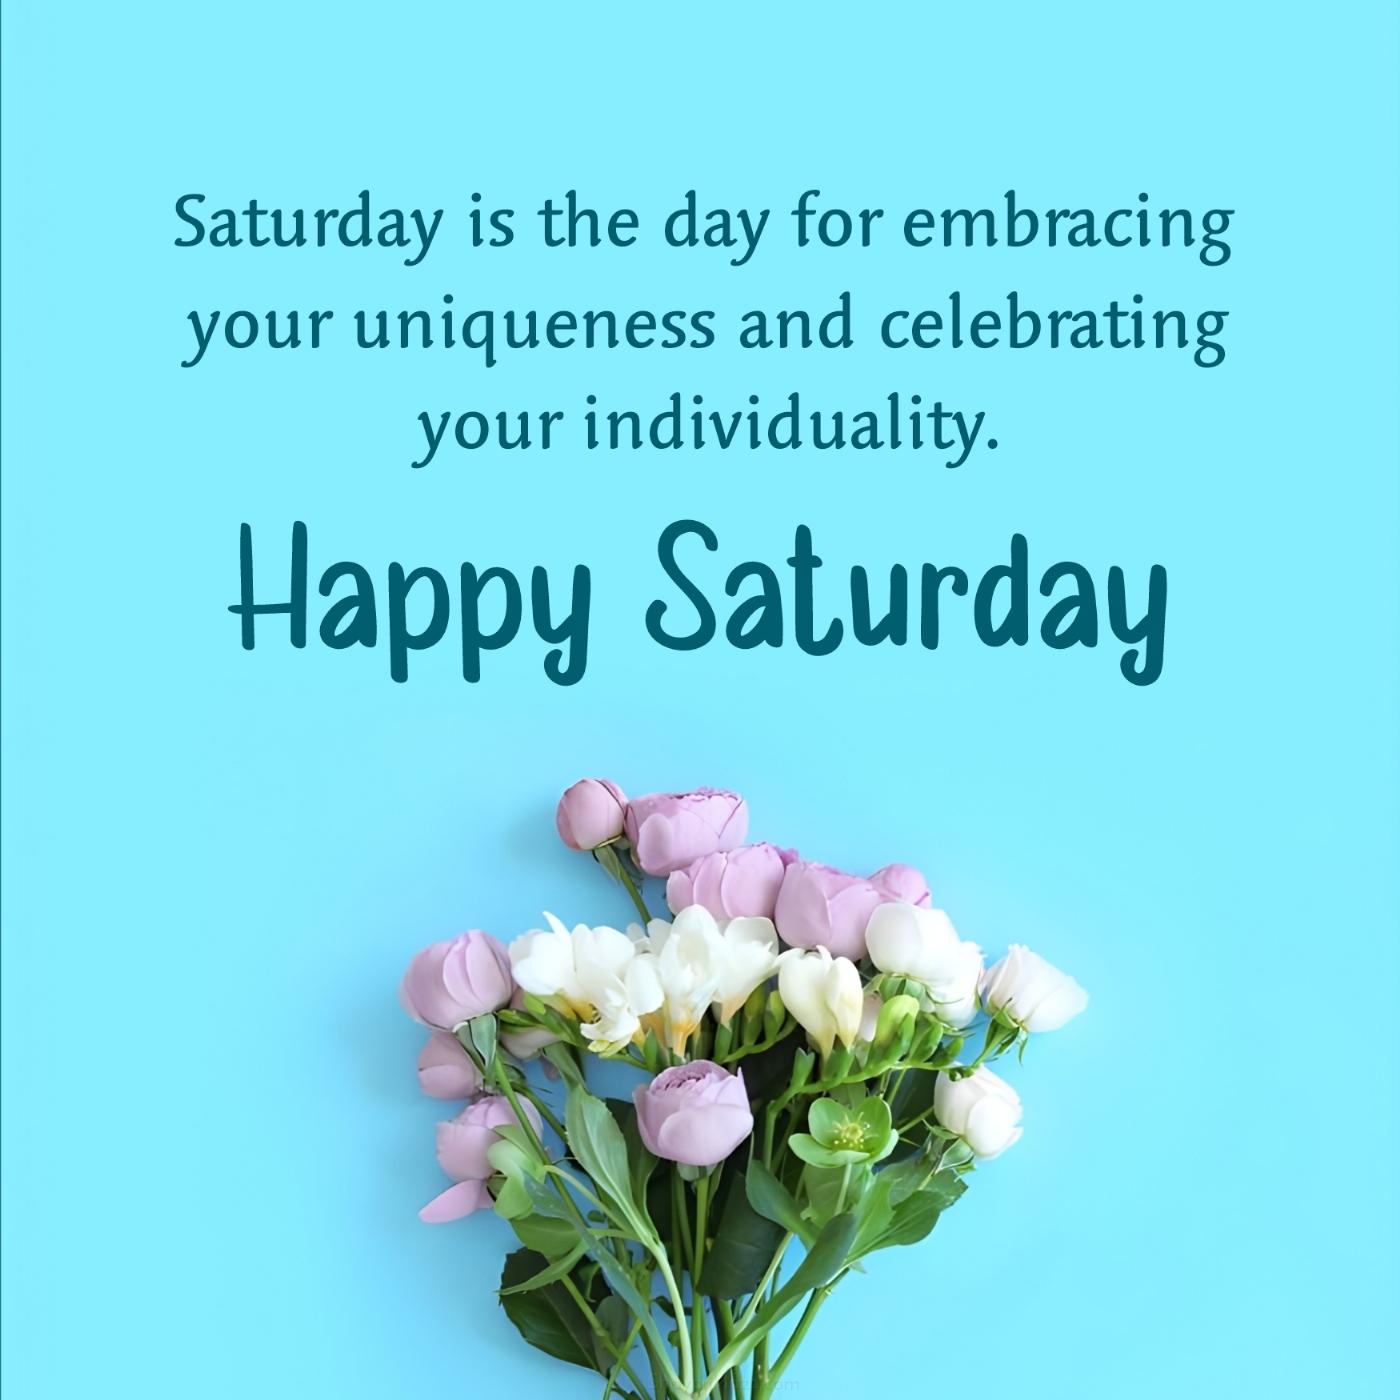 Saturday is the day for embracing your uniqueness